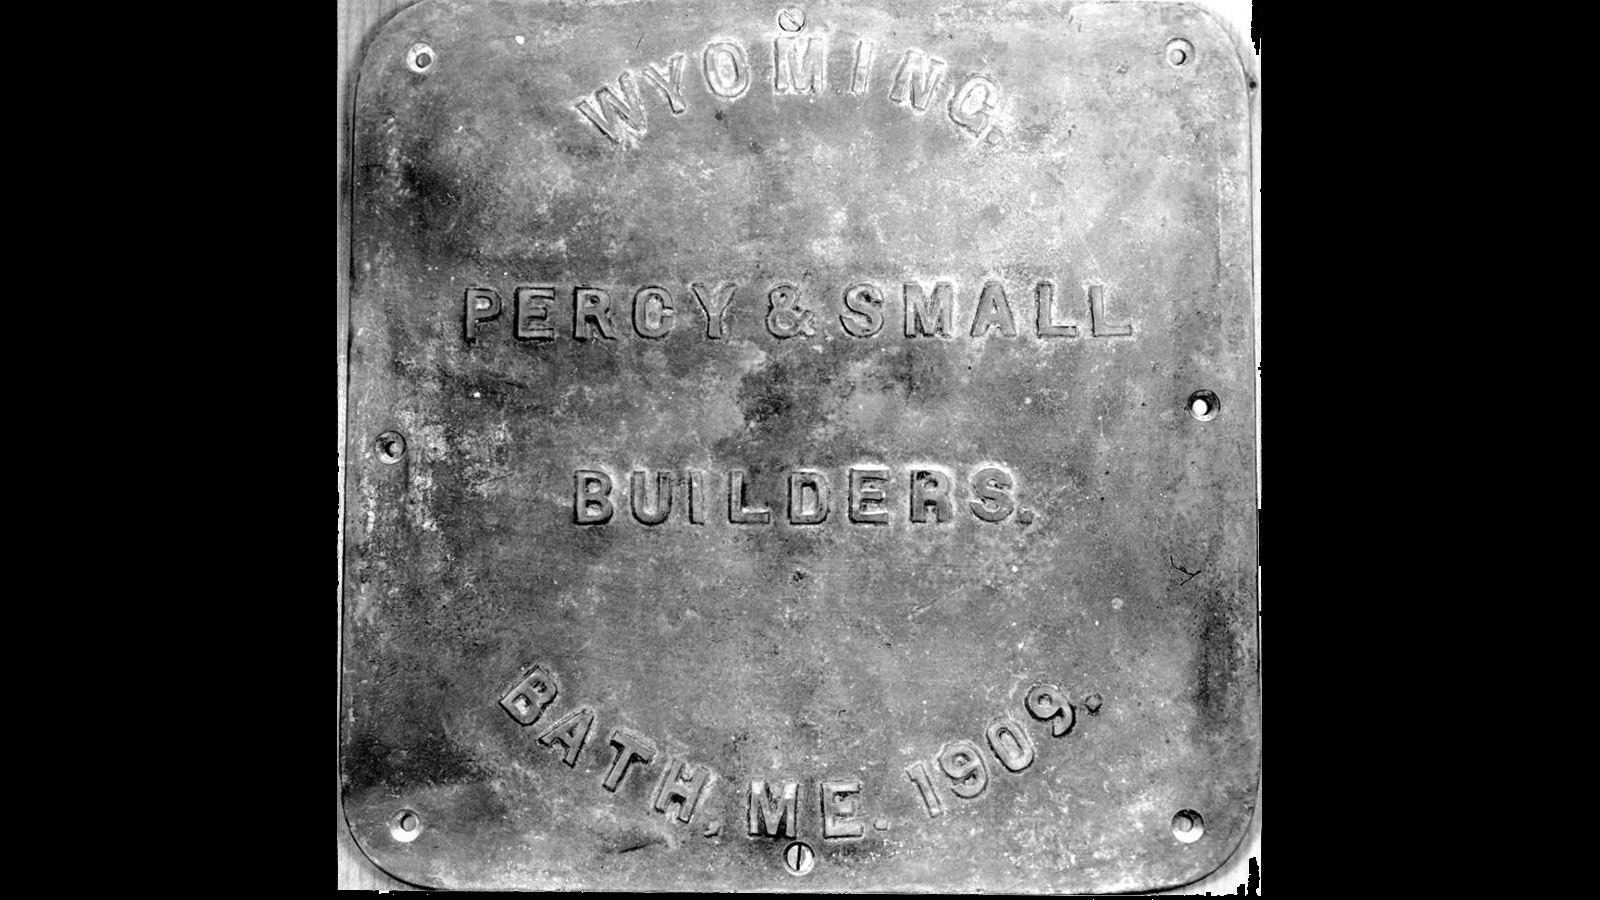 The Percy and Small builder's plate attached to the Wyoming.